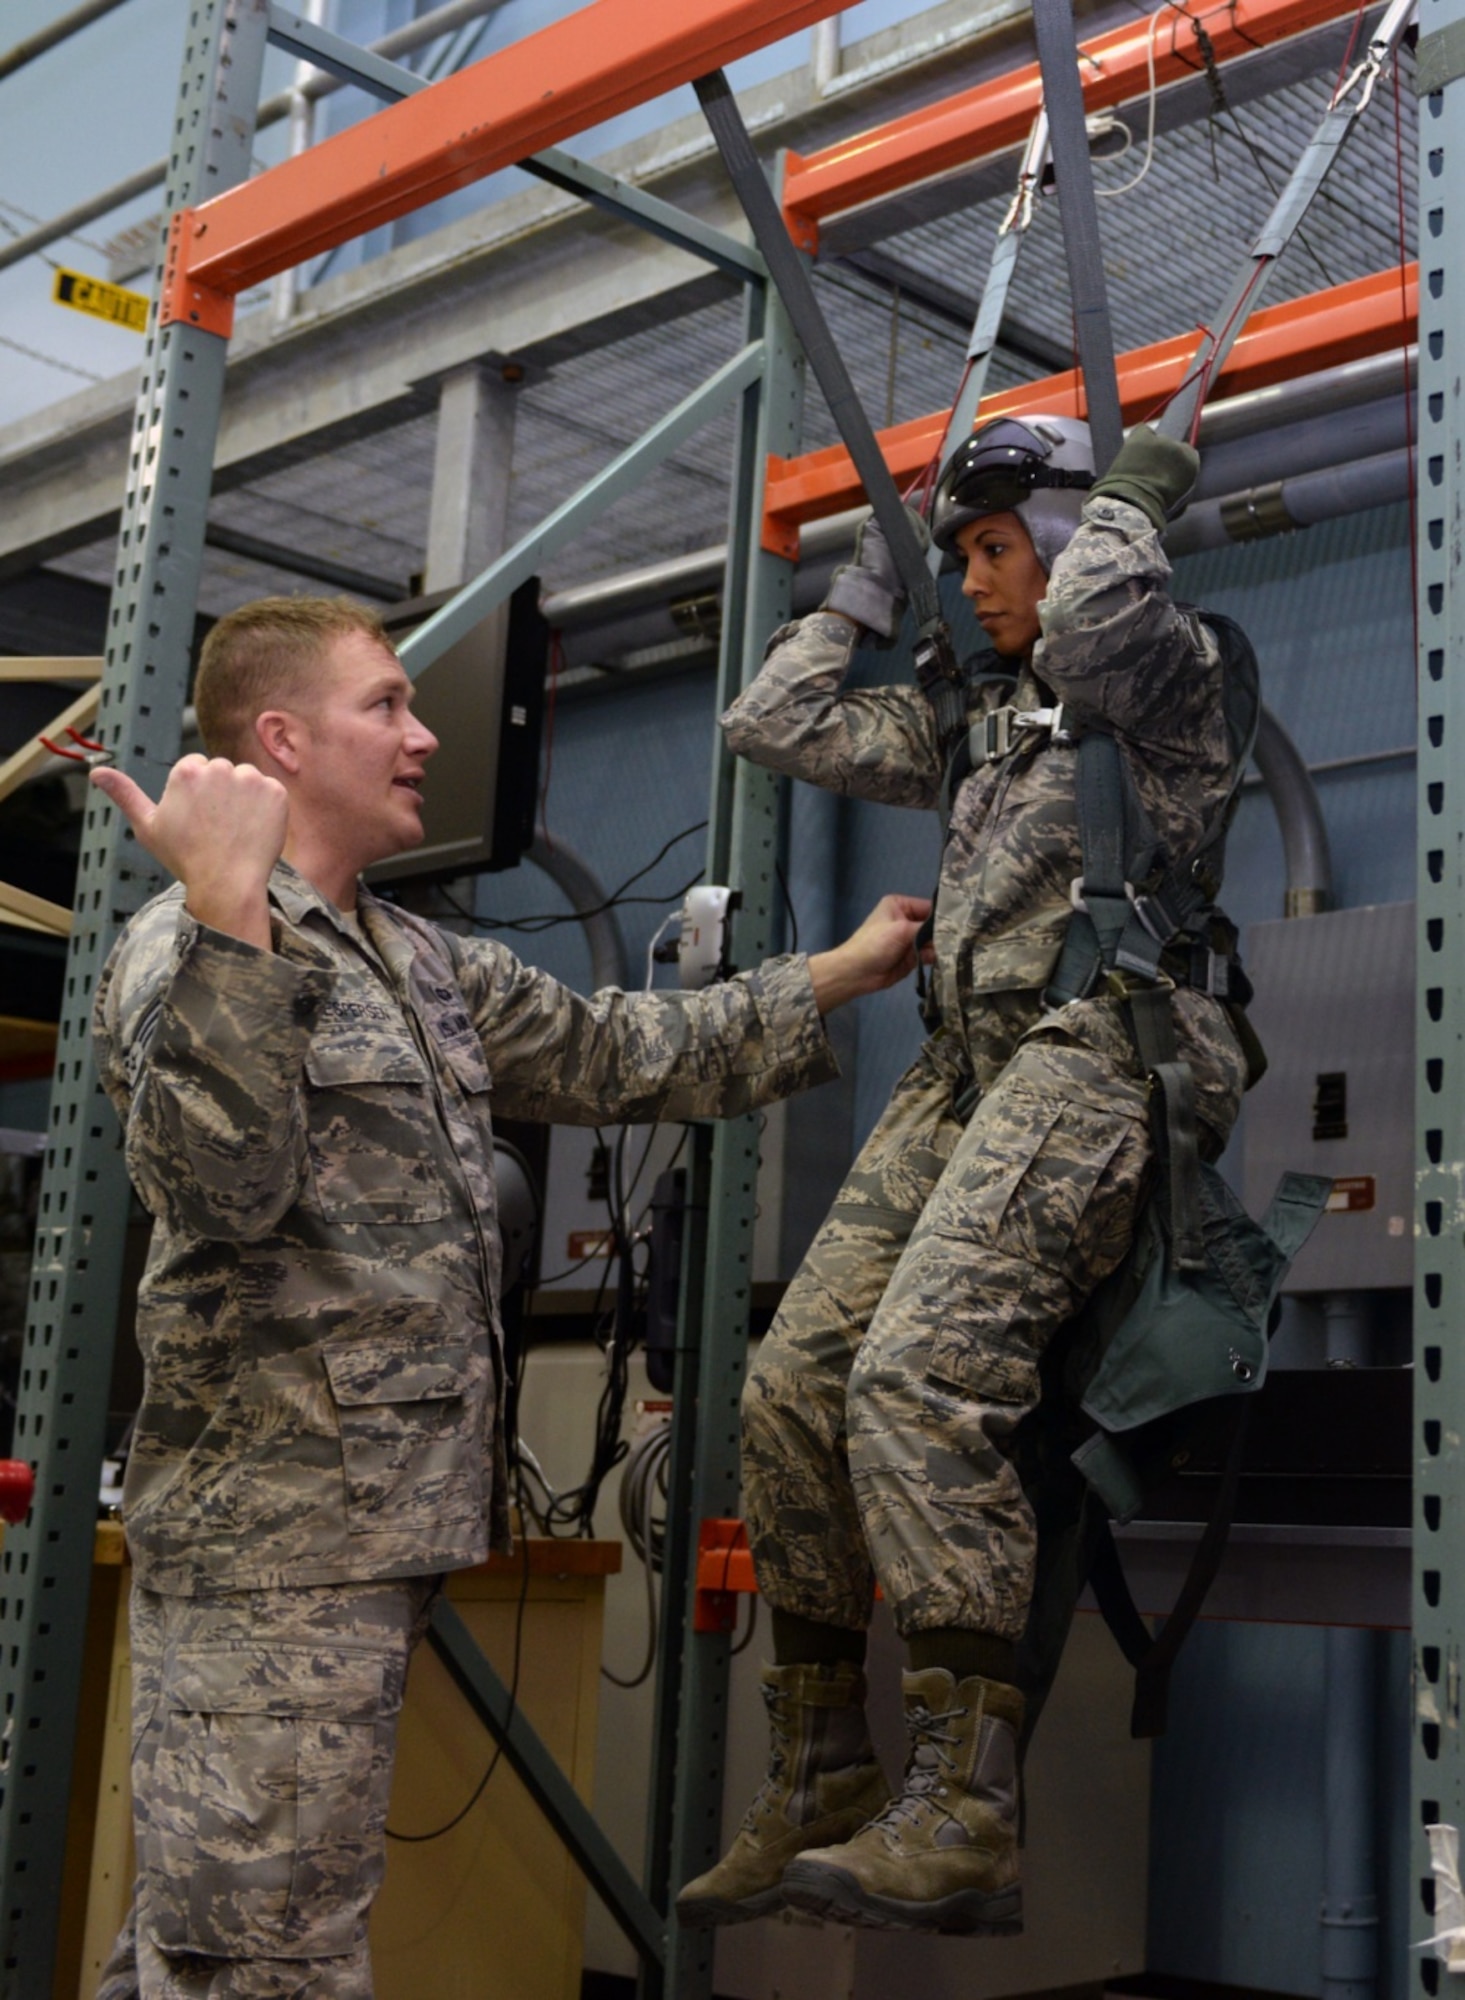 Staff Sgt. Dustin Jespersen, a 28th Operations Support Squadron survival, evasion, resistance and escape specialist, left, instructs Chief Master Sgt. Sonia Lee, the former 28th Bomb Wing command chief, on emergency parachute training at the SERE building on Ellsworth Air Force Base, S.D., Feb. 10, 2016. After being awarded the 2018 Air Rescue Association Richard T. Kight Award, Jespersen was promoted to technical sergeant as part of the Stripes for Exceptional Performers (STEP) program. (U.S. Air Force photo by Airman Donald C. Knechtel)